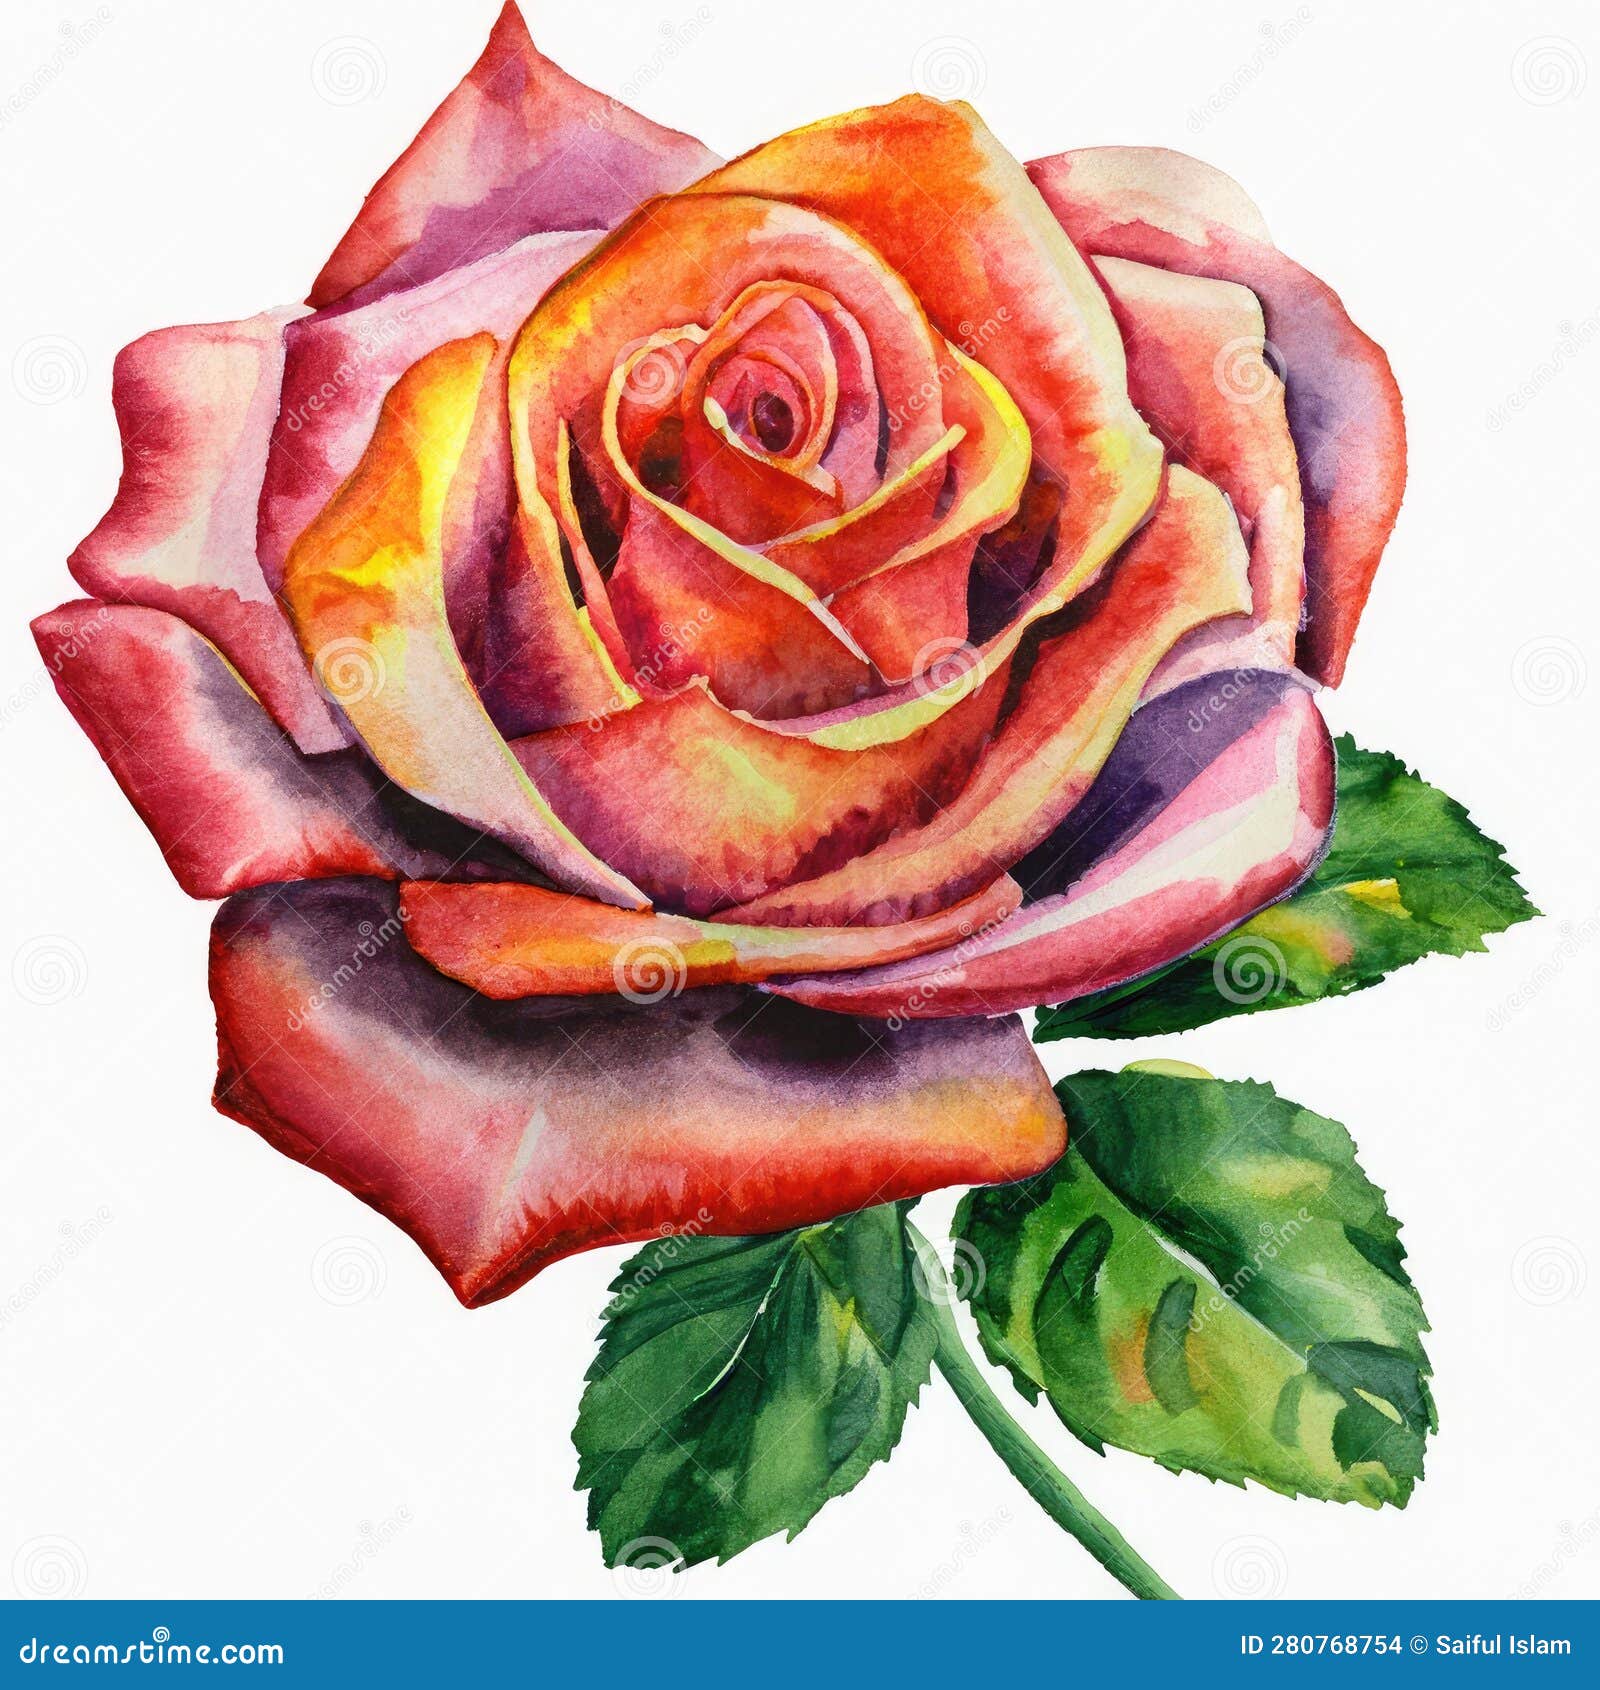 Illustration of Red Rose Watercolor Painting Design Stock Illustration ...